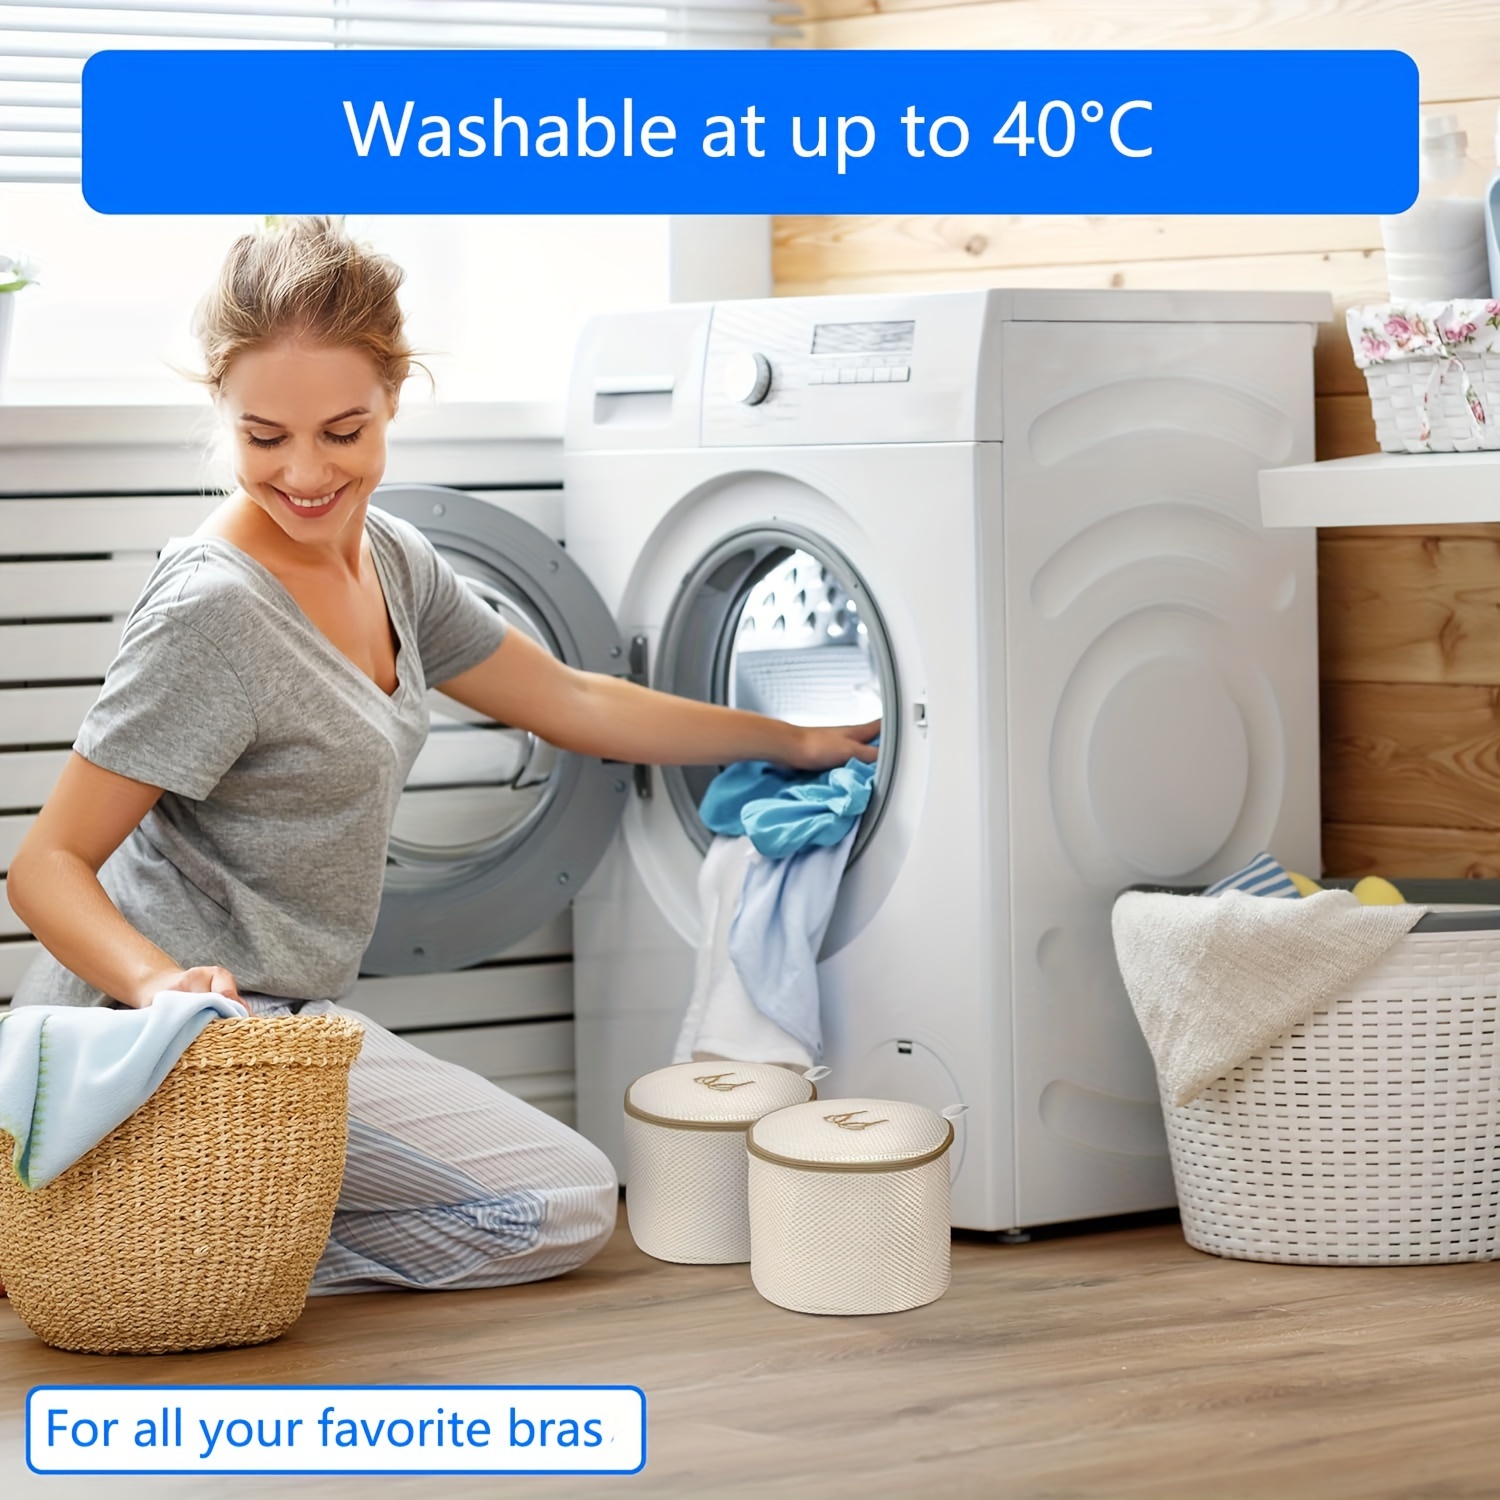 600W Portable Clothes Dryer - Compact and Convenient Drying Solution for  Apartment, Dorm, RV - Easy to Use Mini Dryer with Dryer - AliExpress